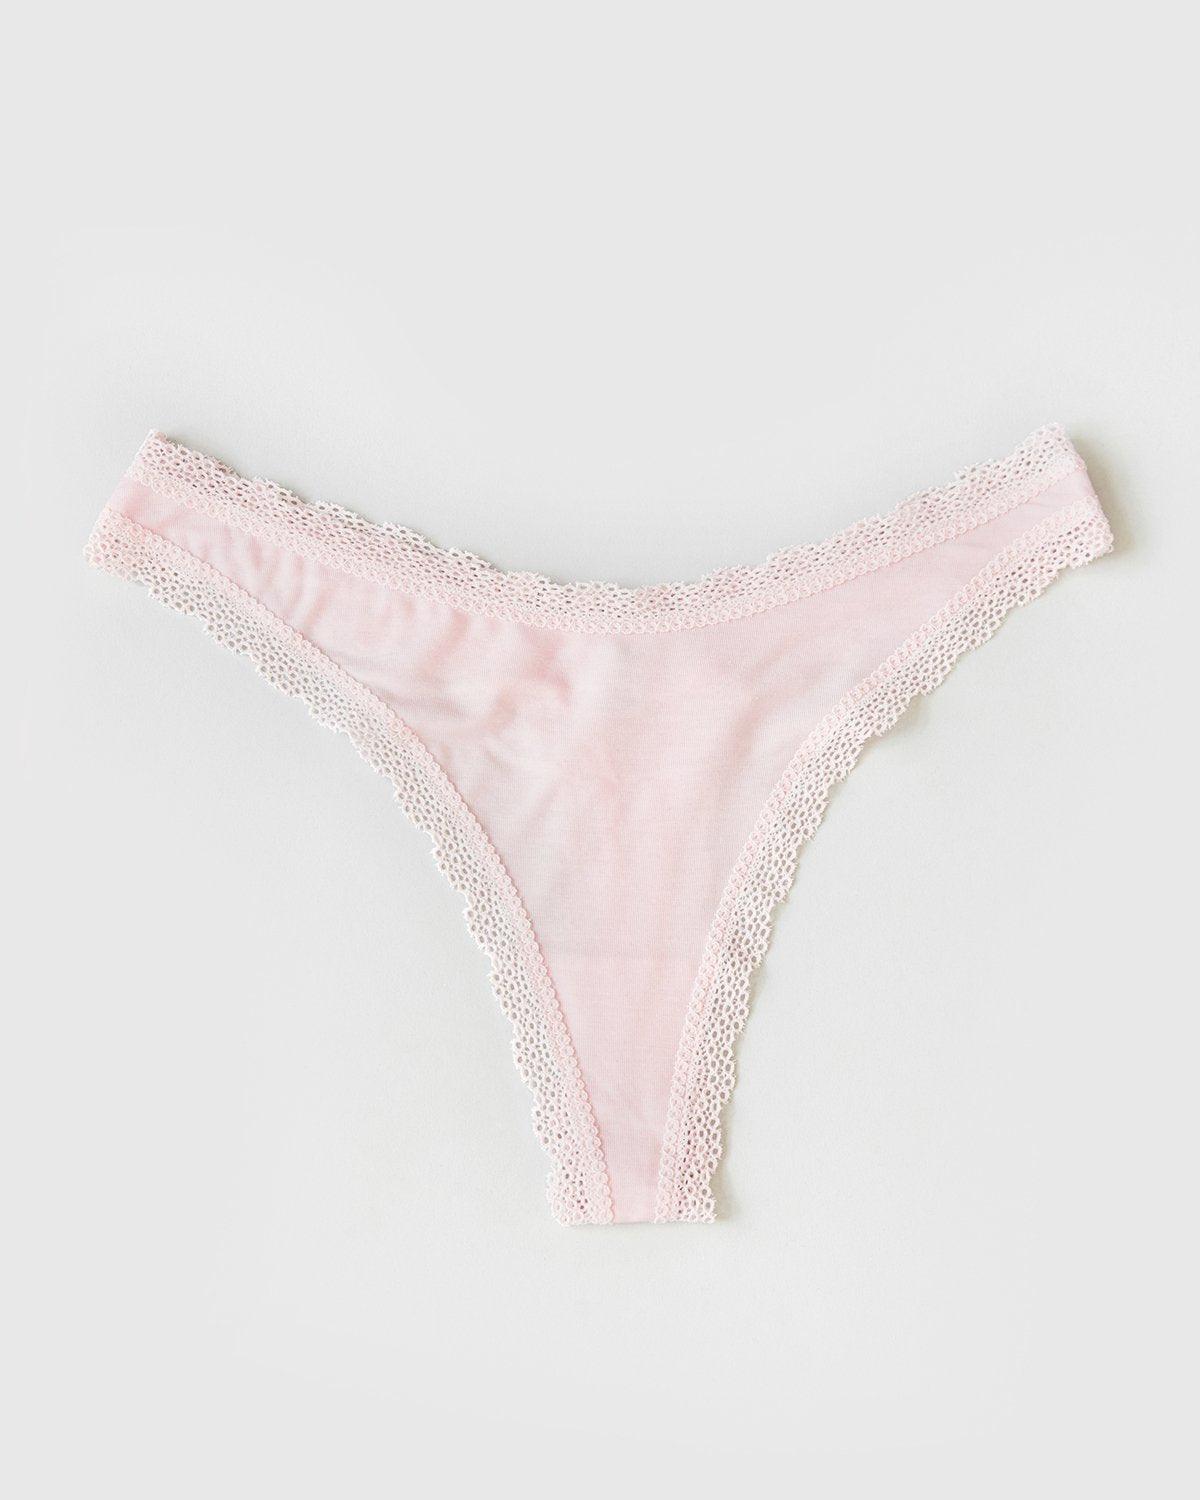 Biodegradable Thong - Pink | Sustainable TENCEL™ Lace Underwear ...